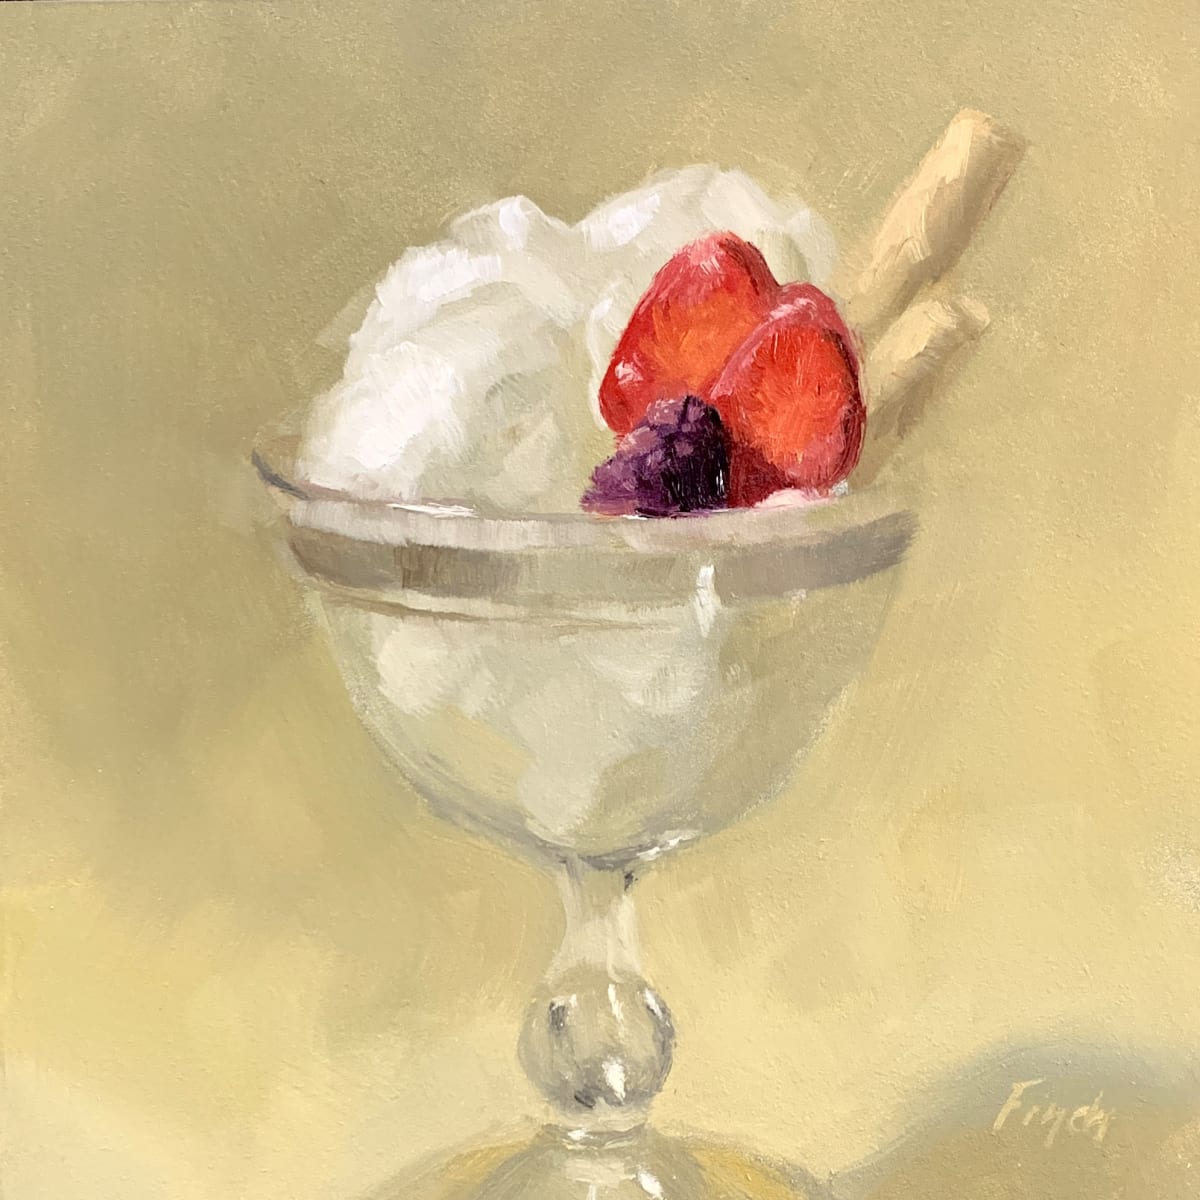 This Makes it Healthy, Right? by Rebecca Finch  Image: This delicate dessert proved to be a challenge to paint before the ice cream's melting altered the placement of the other elements.